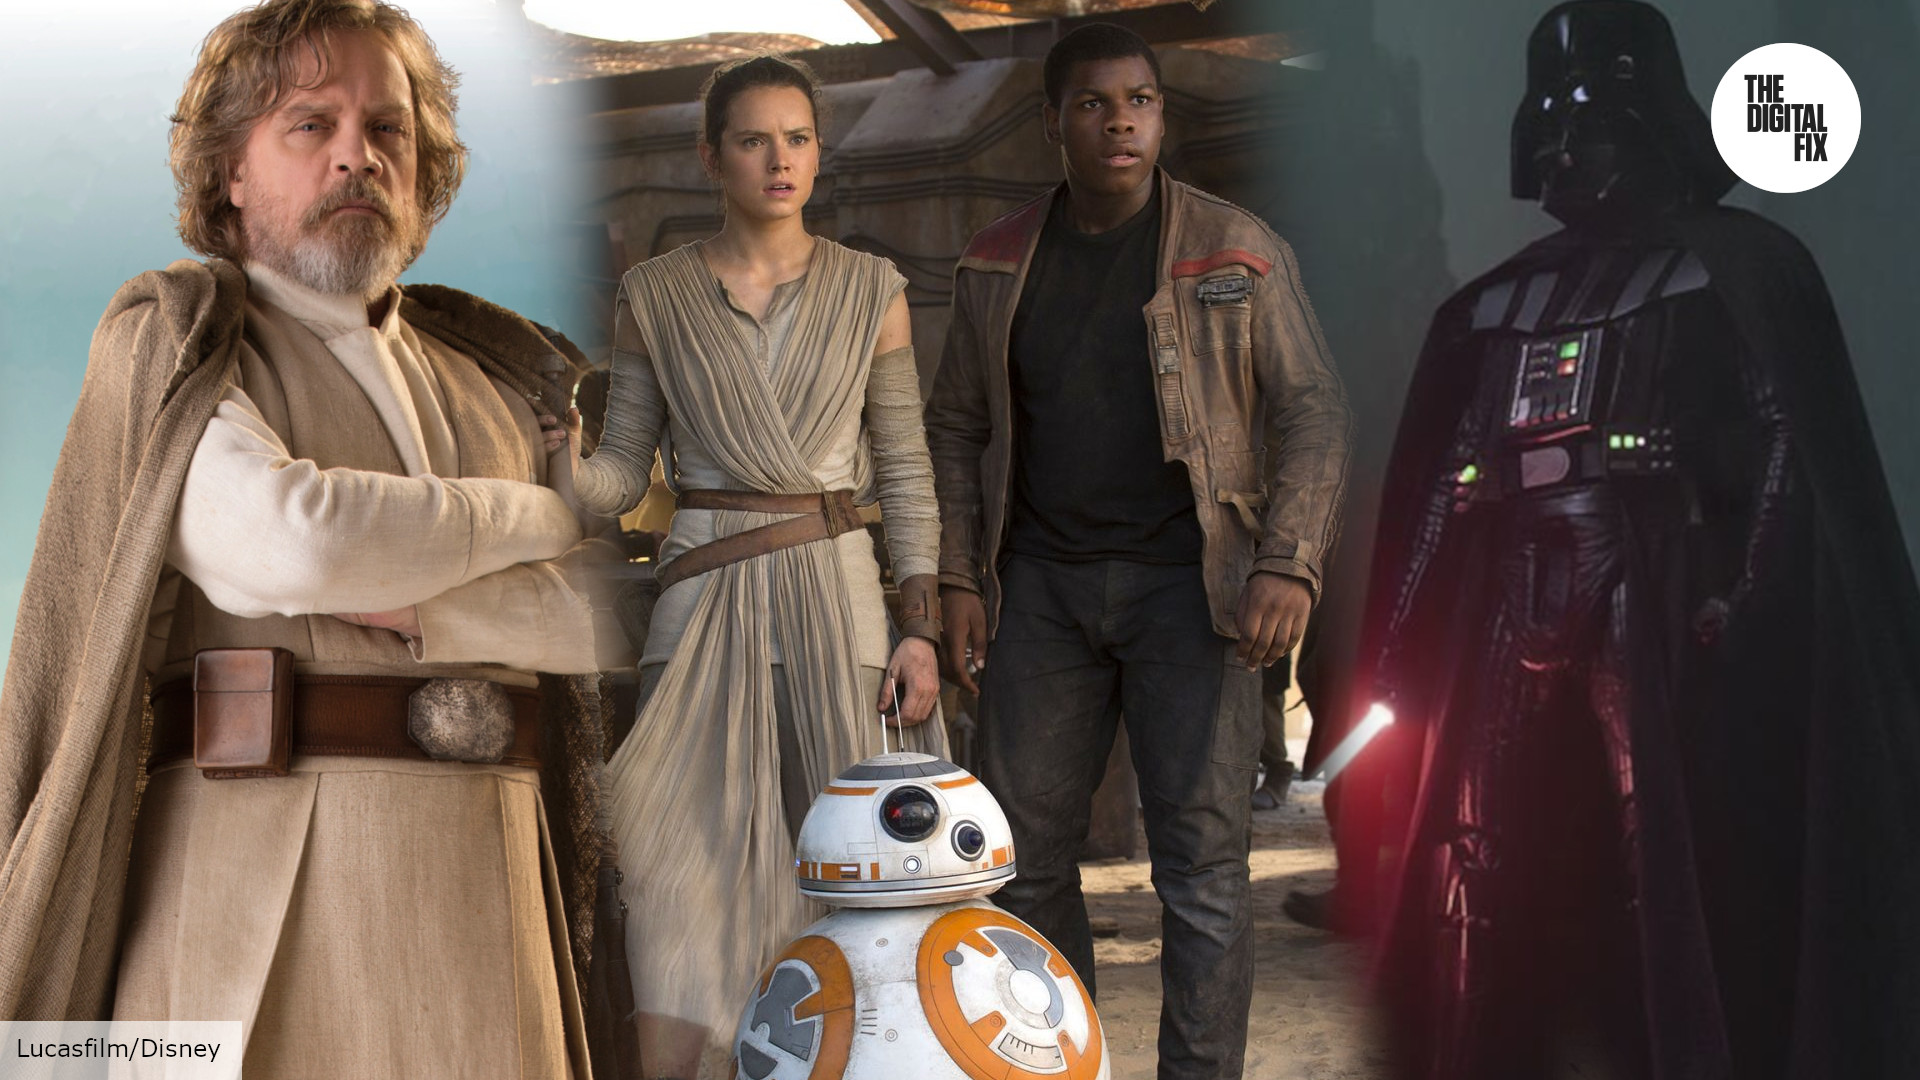 Punch It! Meet the New Characters of Star Wars: The Rise of